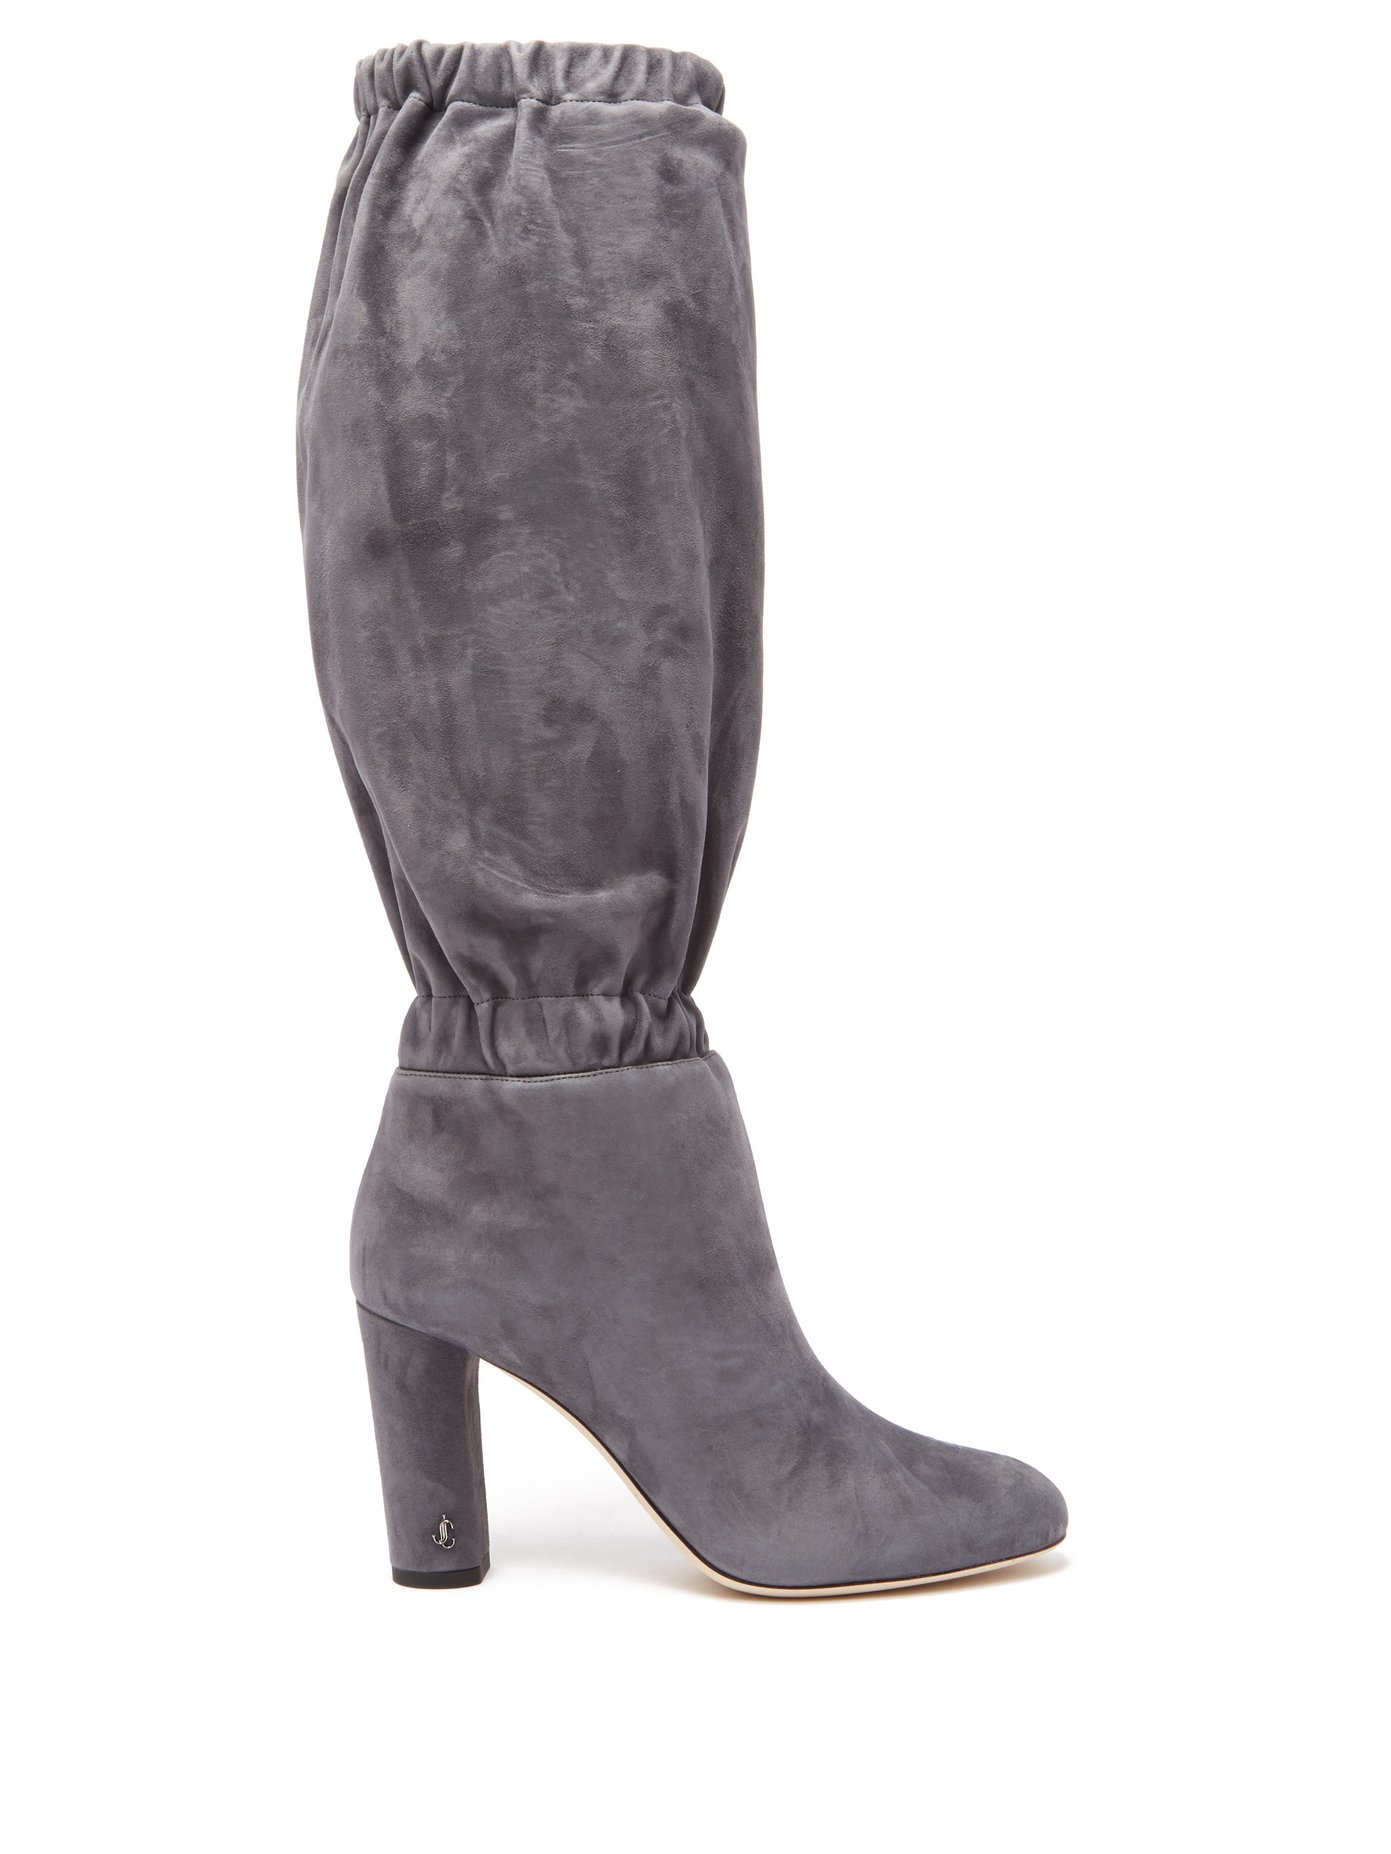 jimmy choo grey suede boots